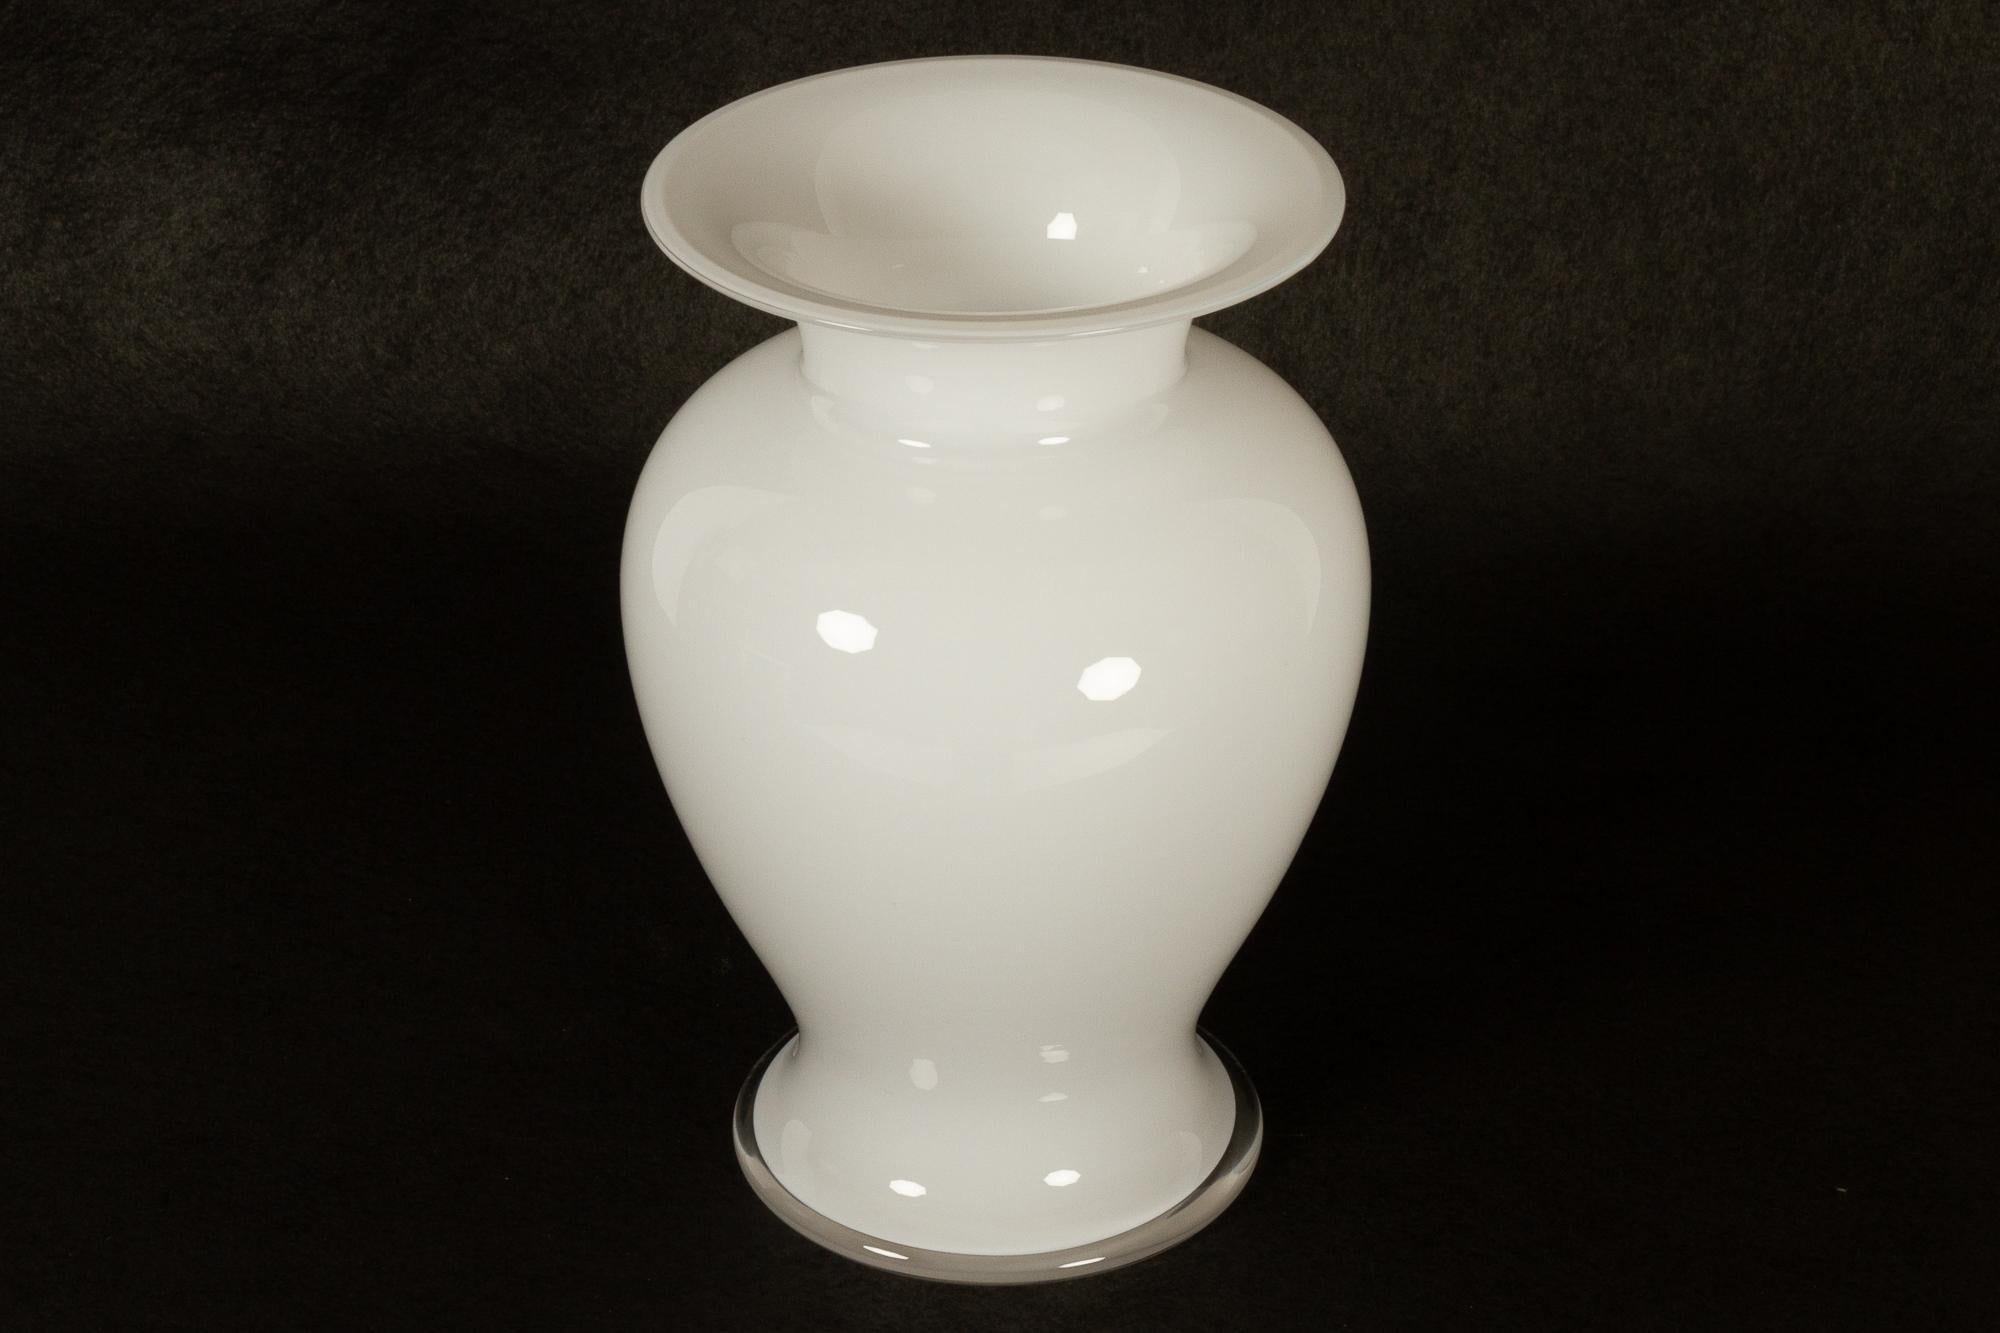 Amphora glass vase by Michael bang for Holmegaard, 1990s.
Large white glass vase designed by Danish designer Michael bang in 1991. Made at Danish glassworks Holmegaard, which was owned by Royal Copenhagen at the time of production. Went out of